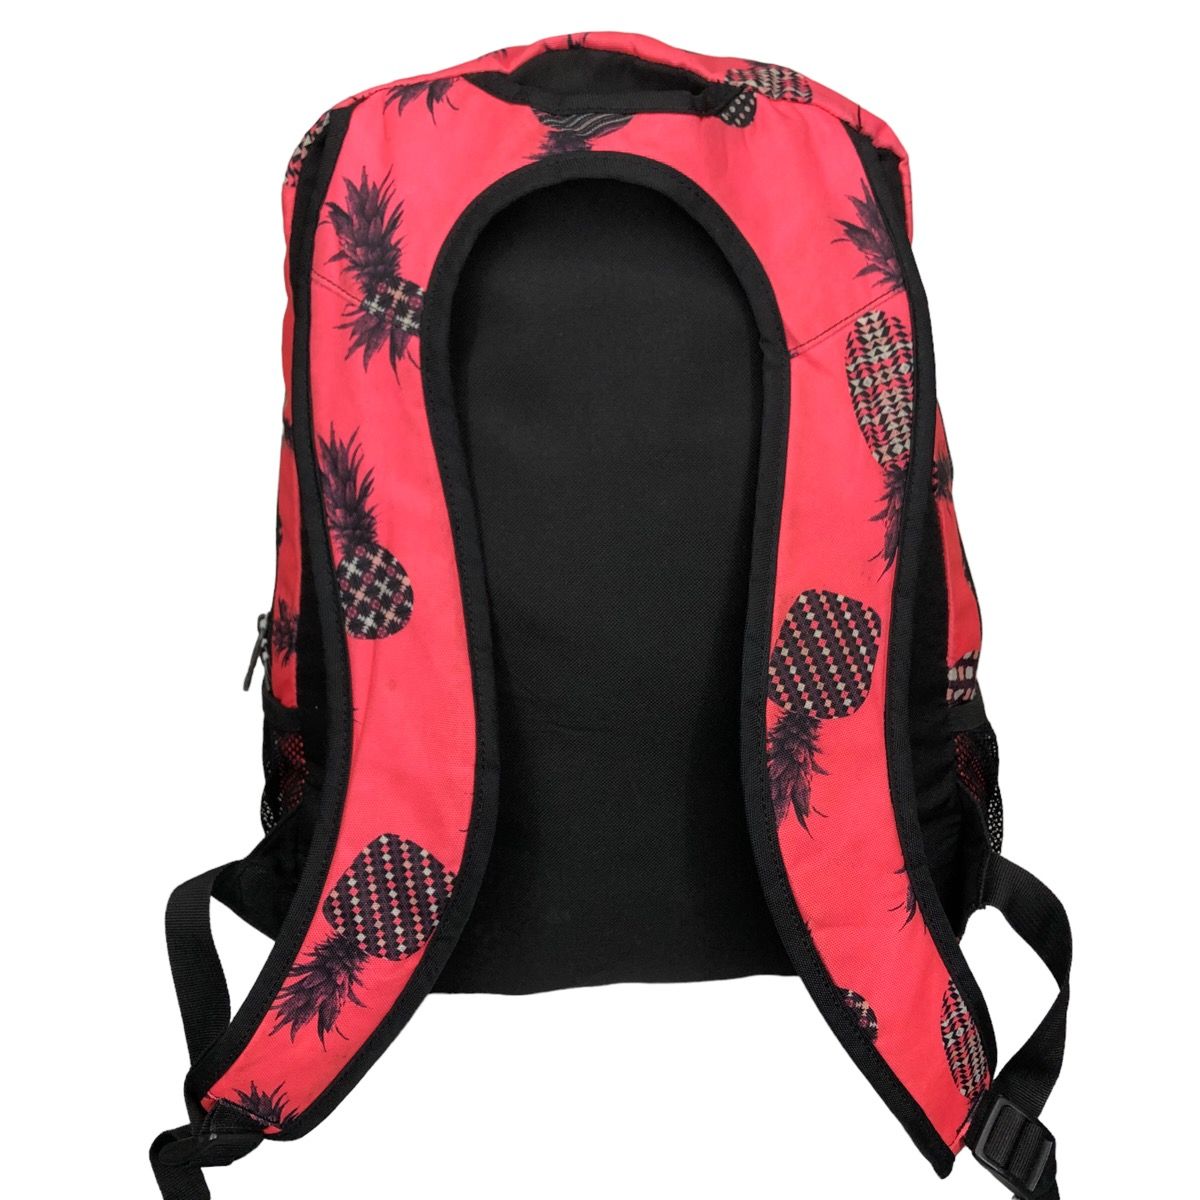 Quicksilver - Roxy Pineapple Backpack - 3